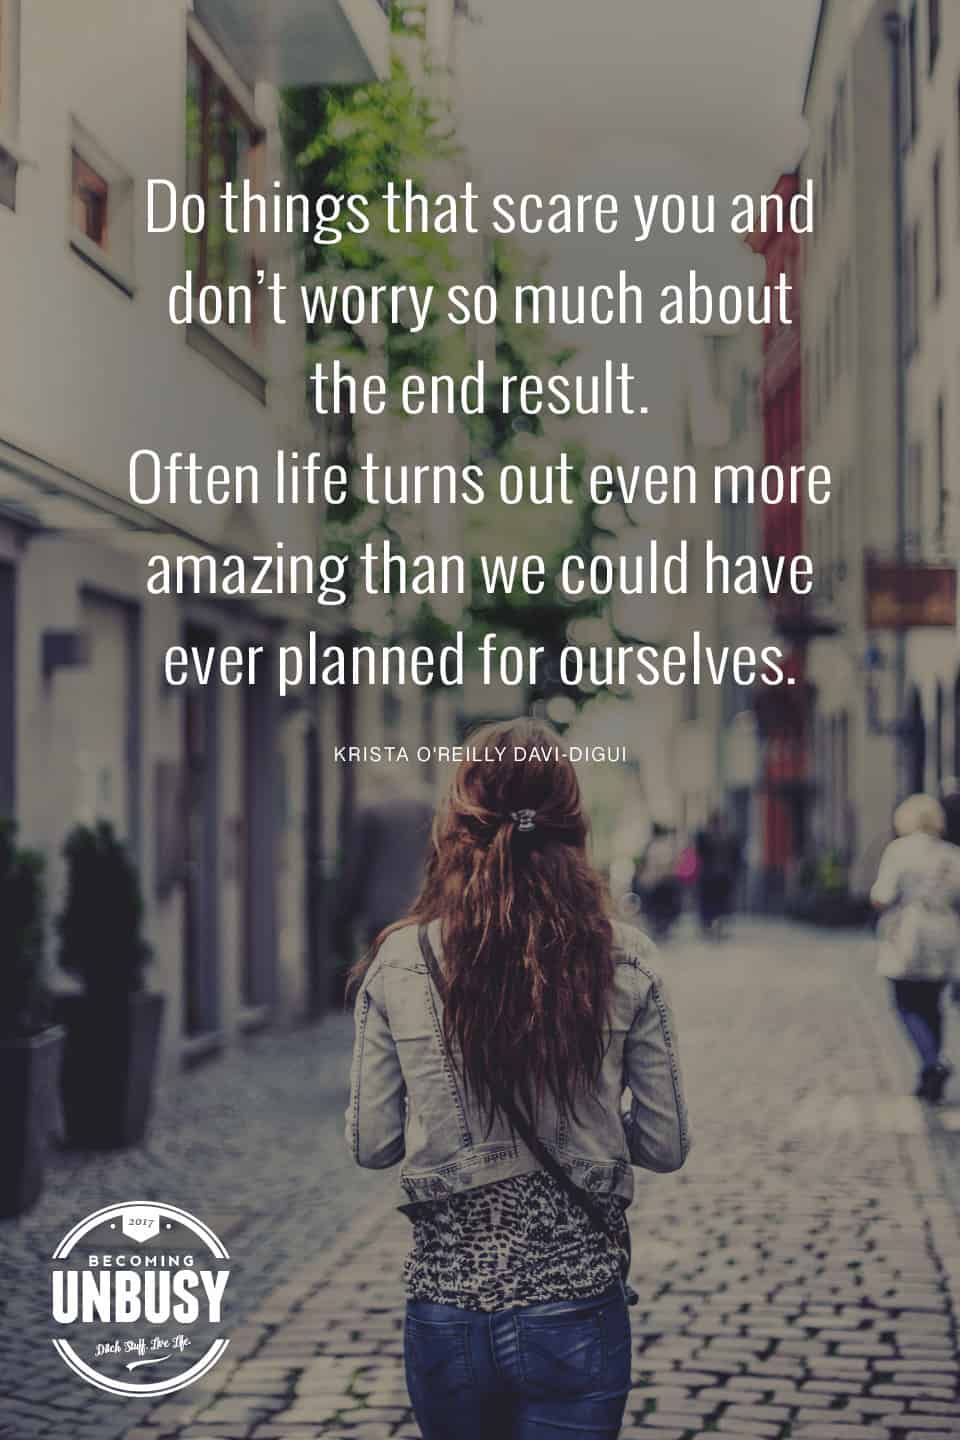 Do things that scare you and don't worry so much about the end result. Often life turns out even more amazing than we could have ever planned for ourselves. *Love this quote and this Becoming UnBusy website.